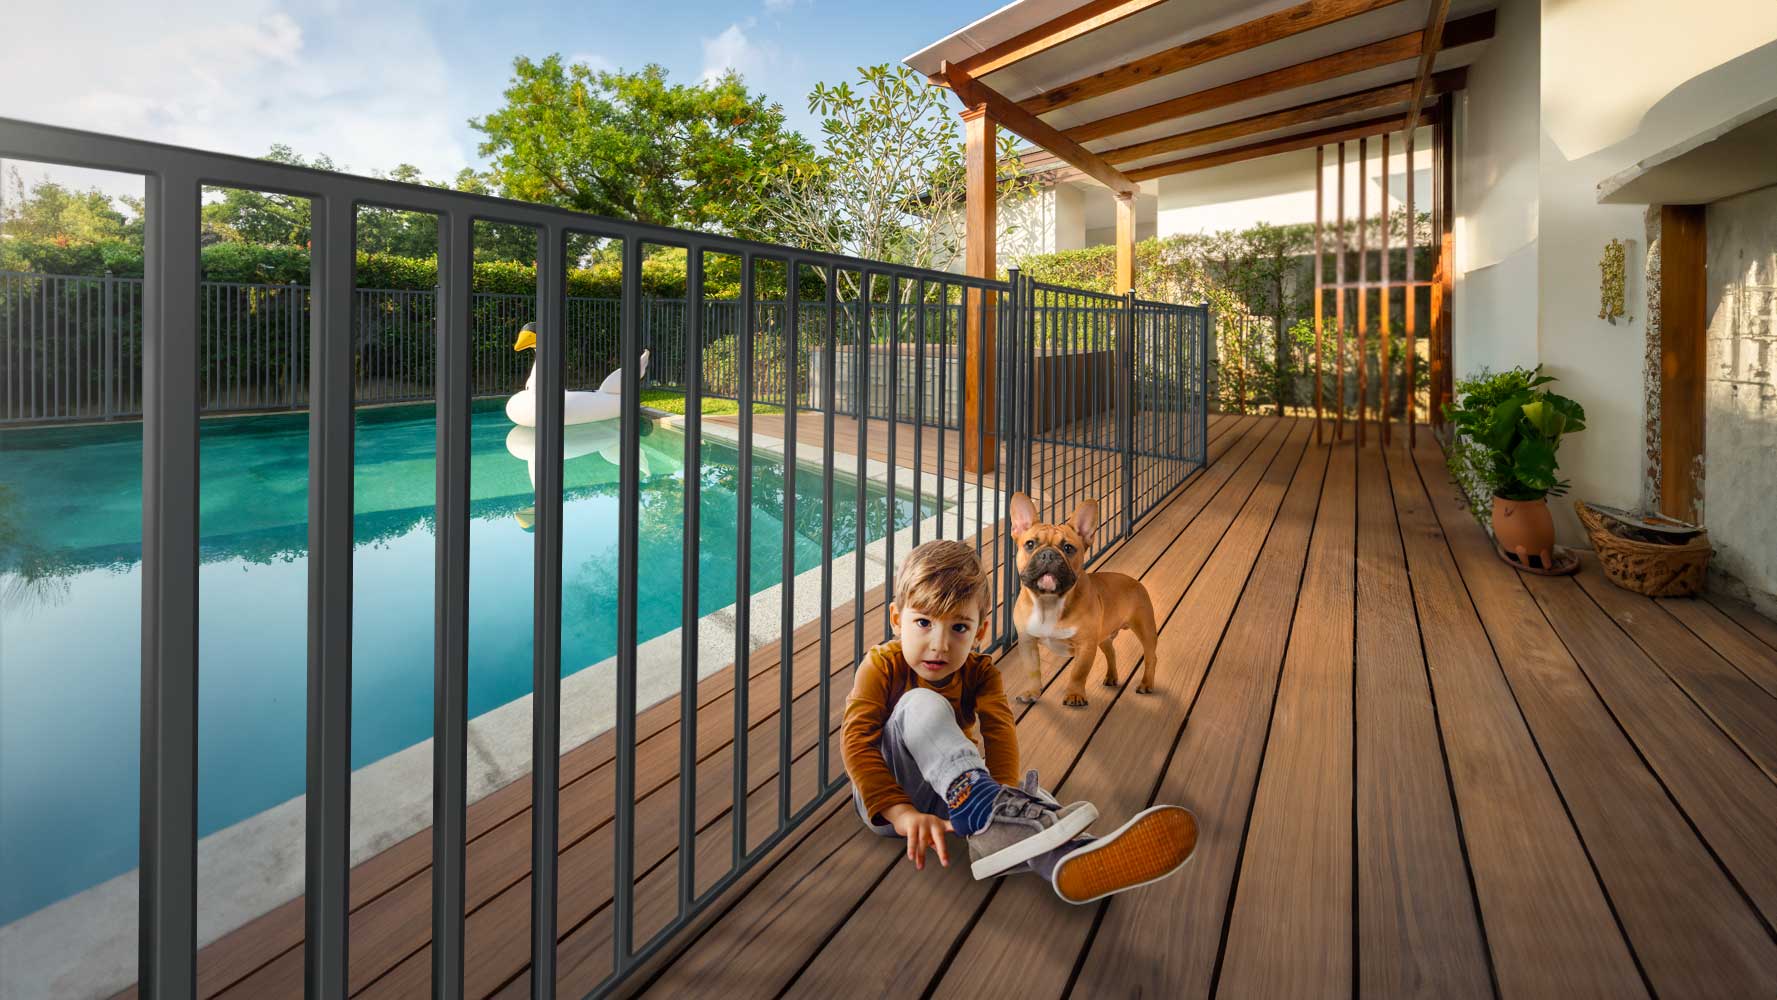 Betafence: Elevating Pool Safety with SA’s First SABS-Approved Pool Fence | Betafence SA